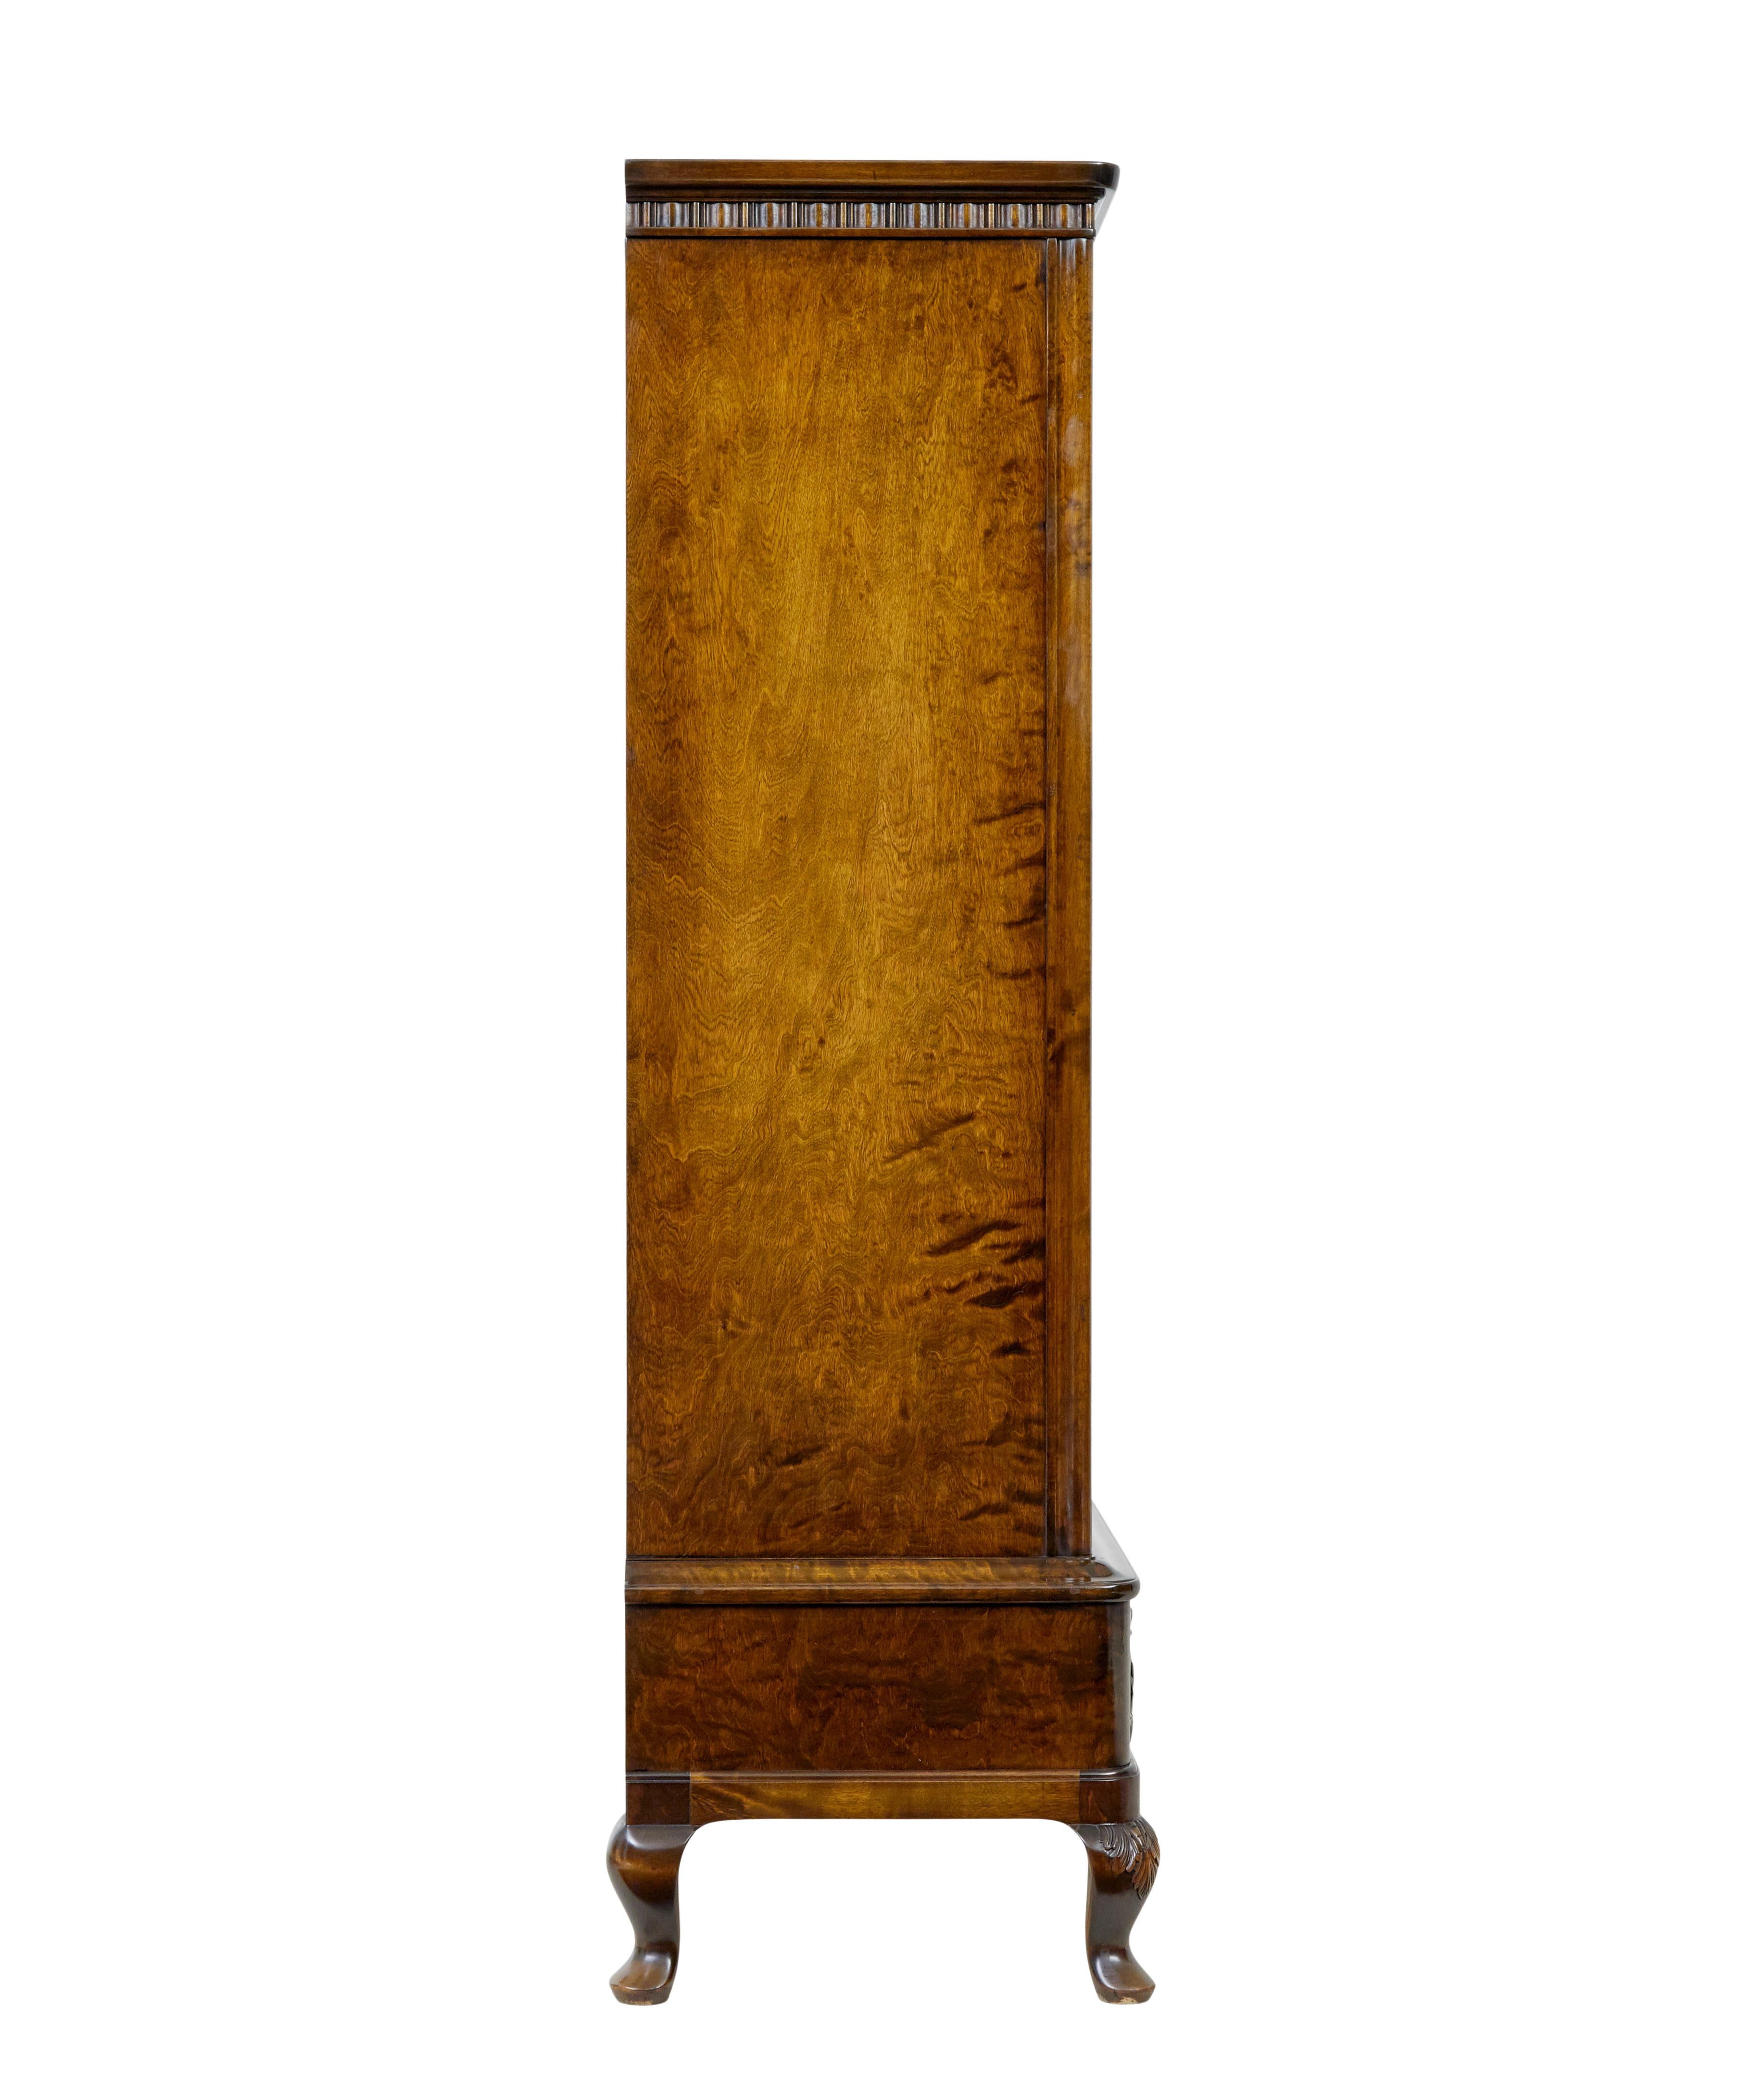 Swedish Mid 20th century burr birch cabinet by Bodafors For Sale